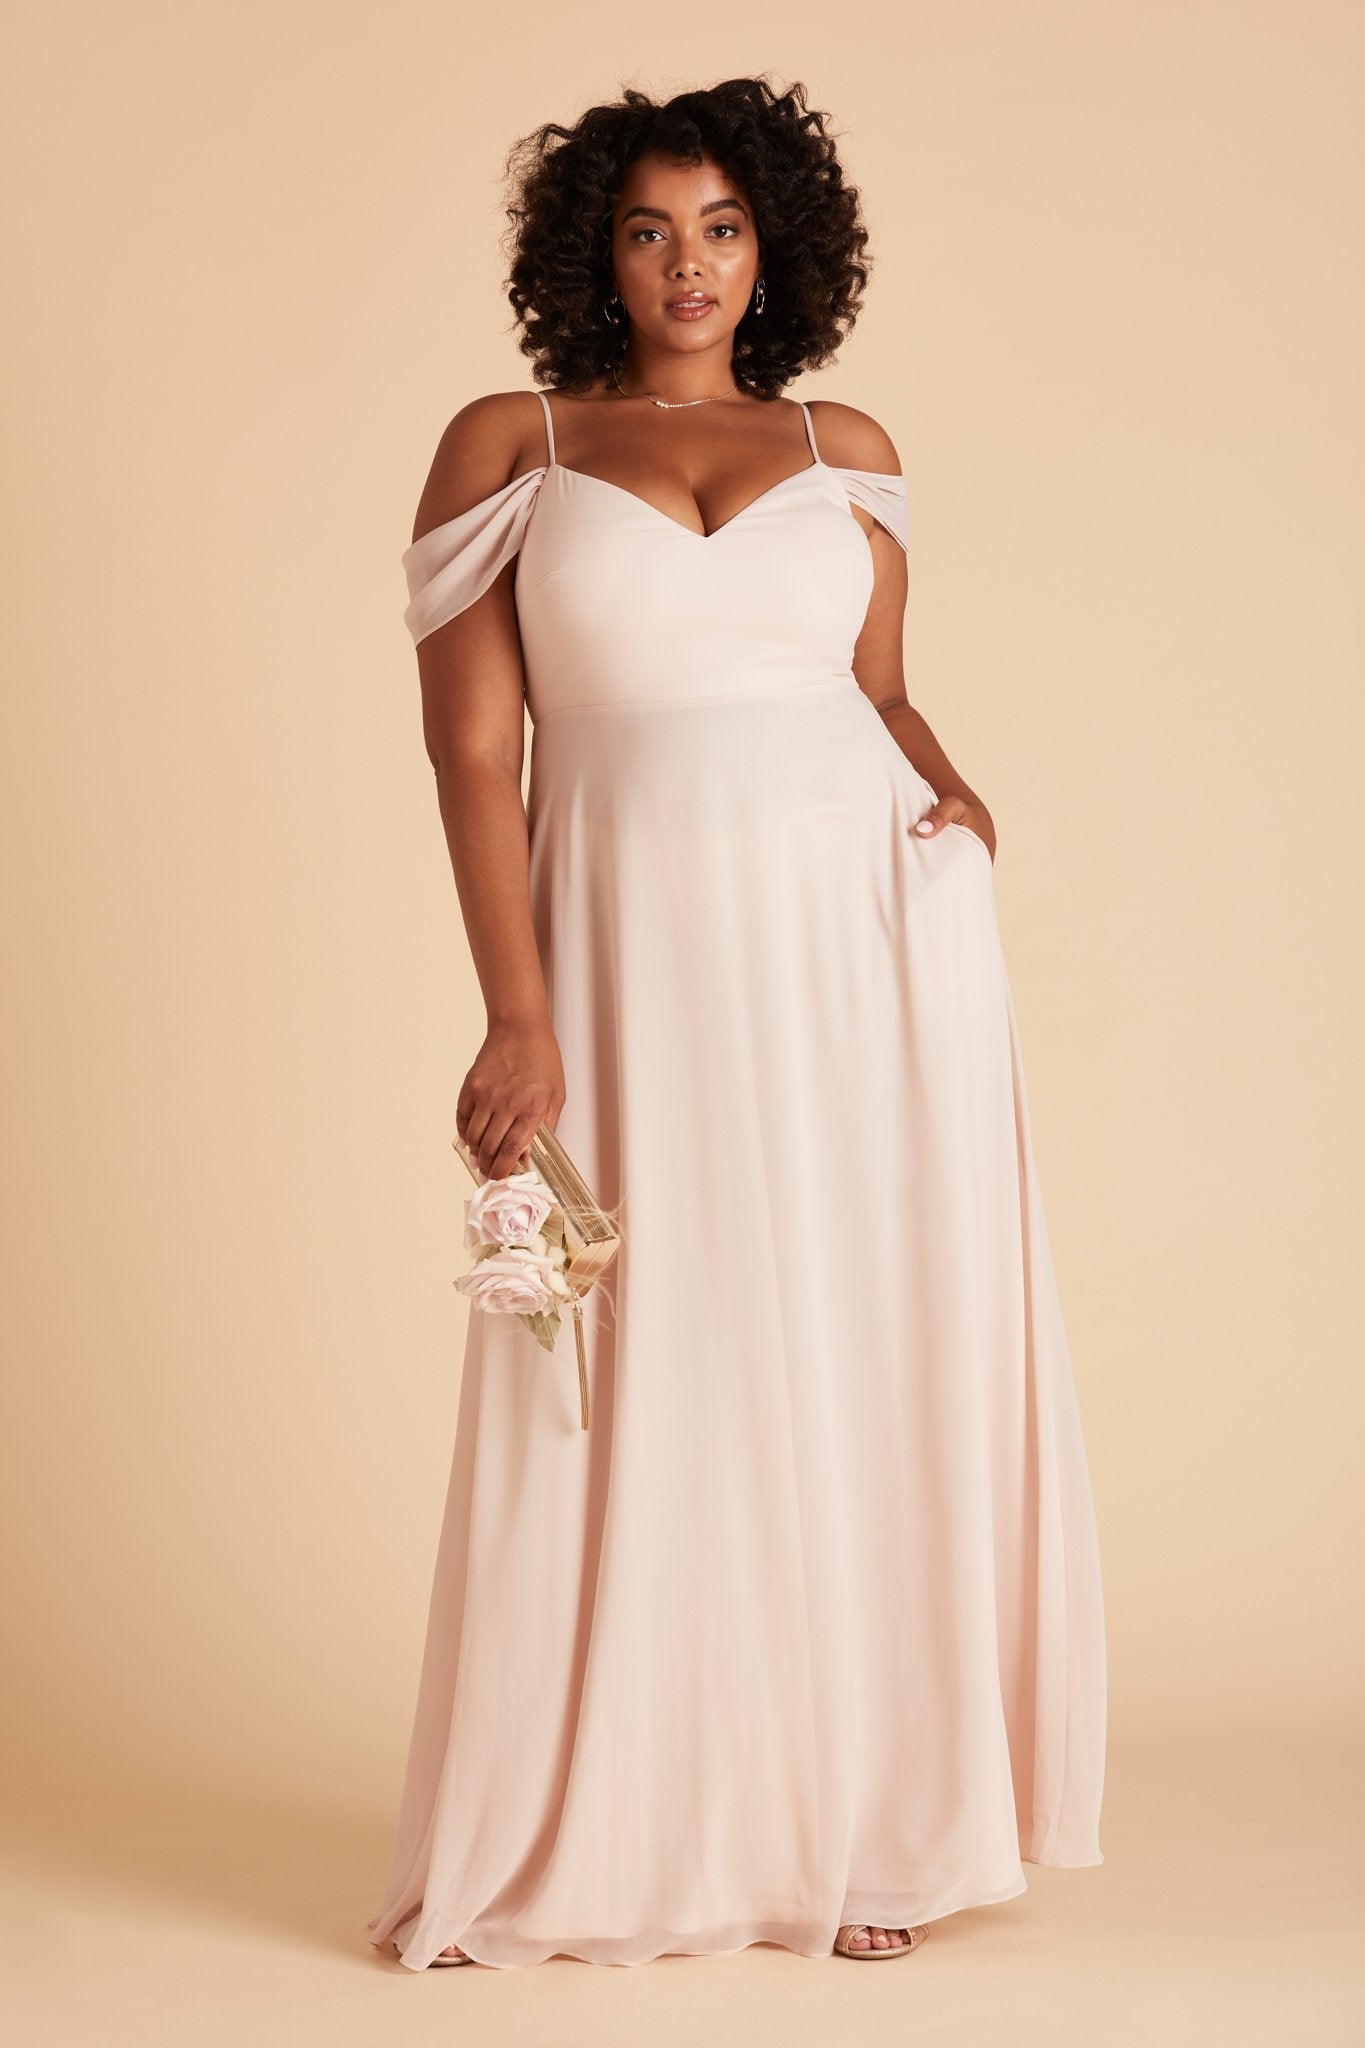 Devin convertible plus size bridesmaids dress in pale blush chiffon by Birdy Grey, front view with hand in pocket